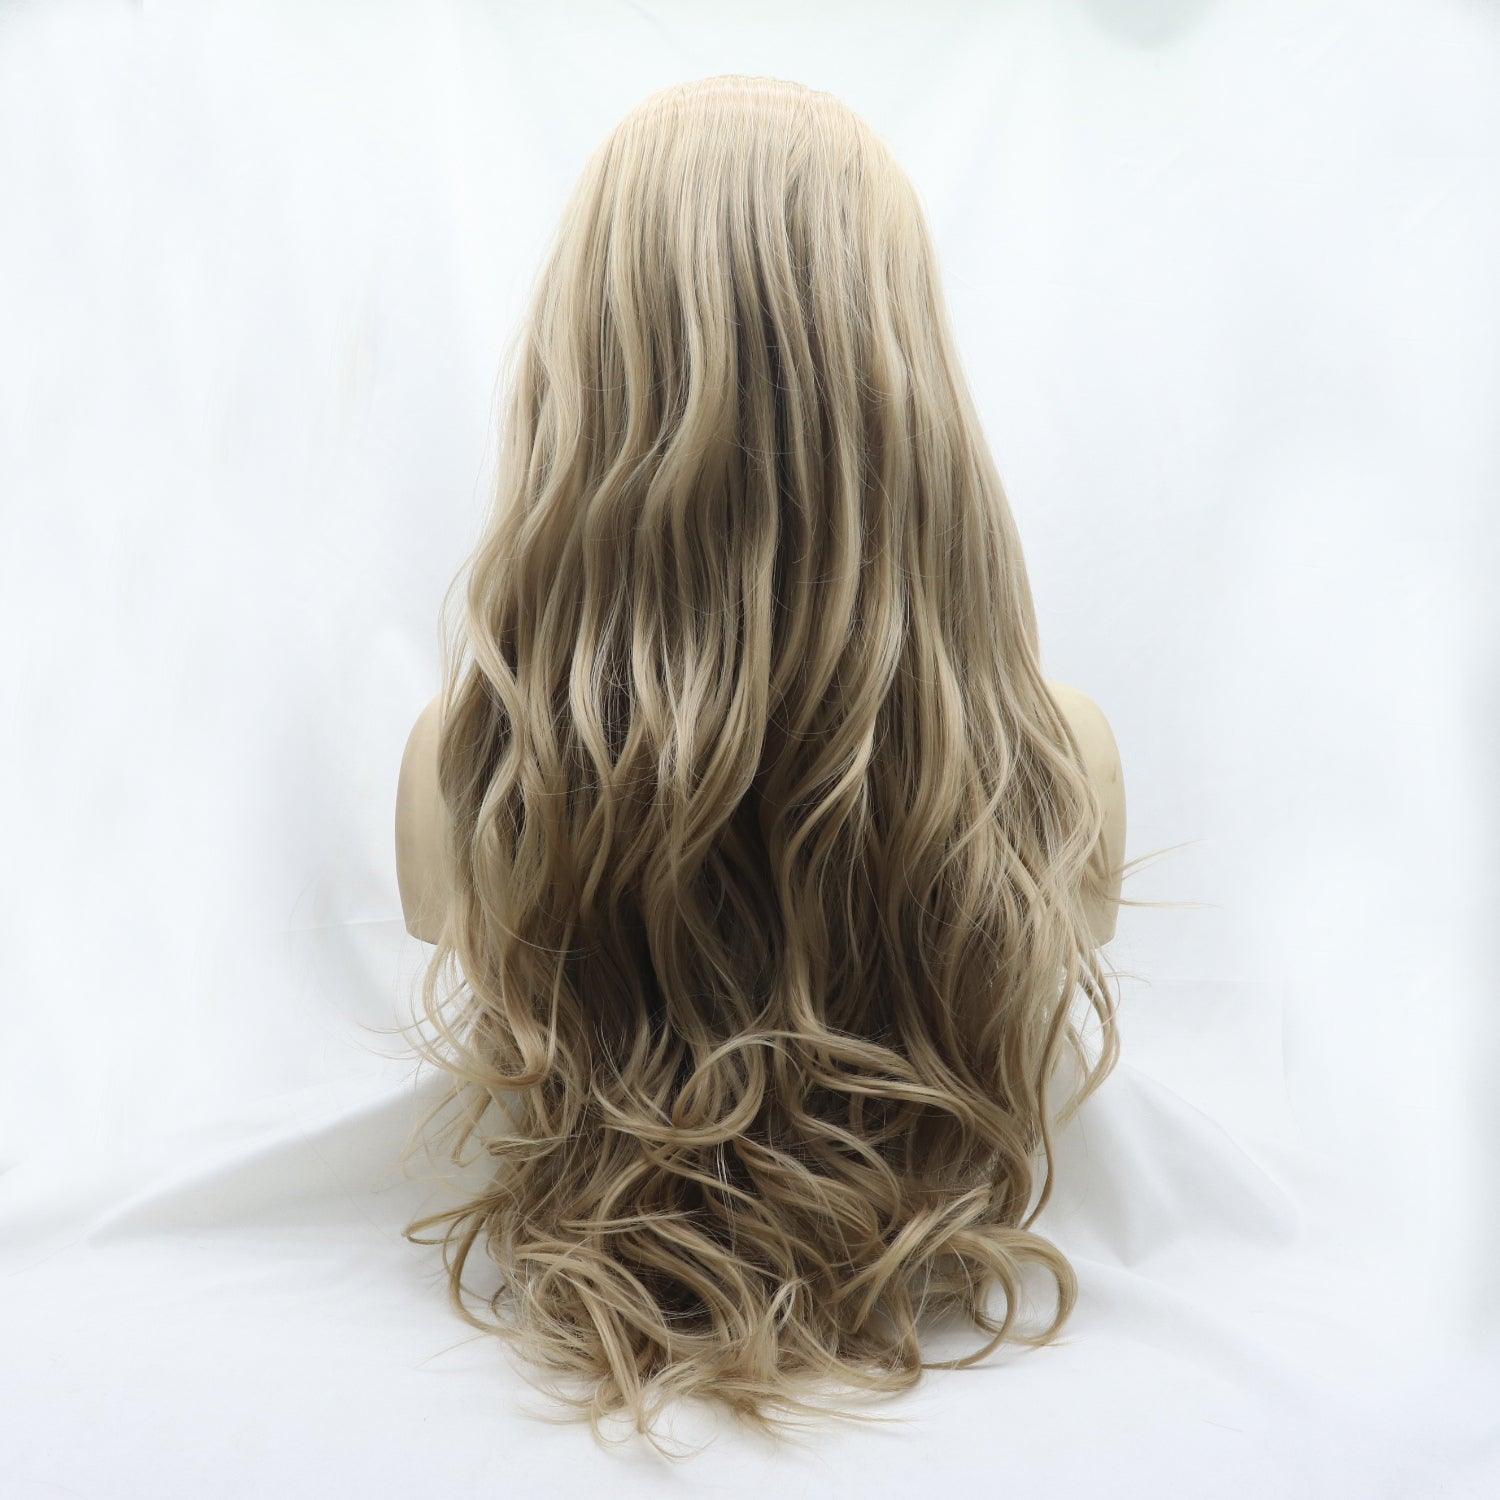 a wig with long blonde hair on a mannequin head